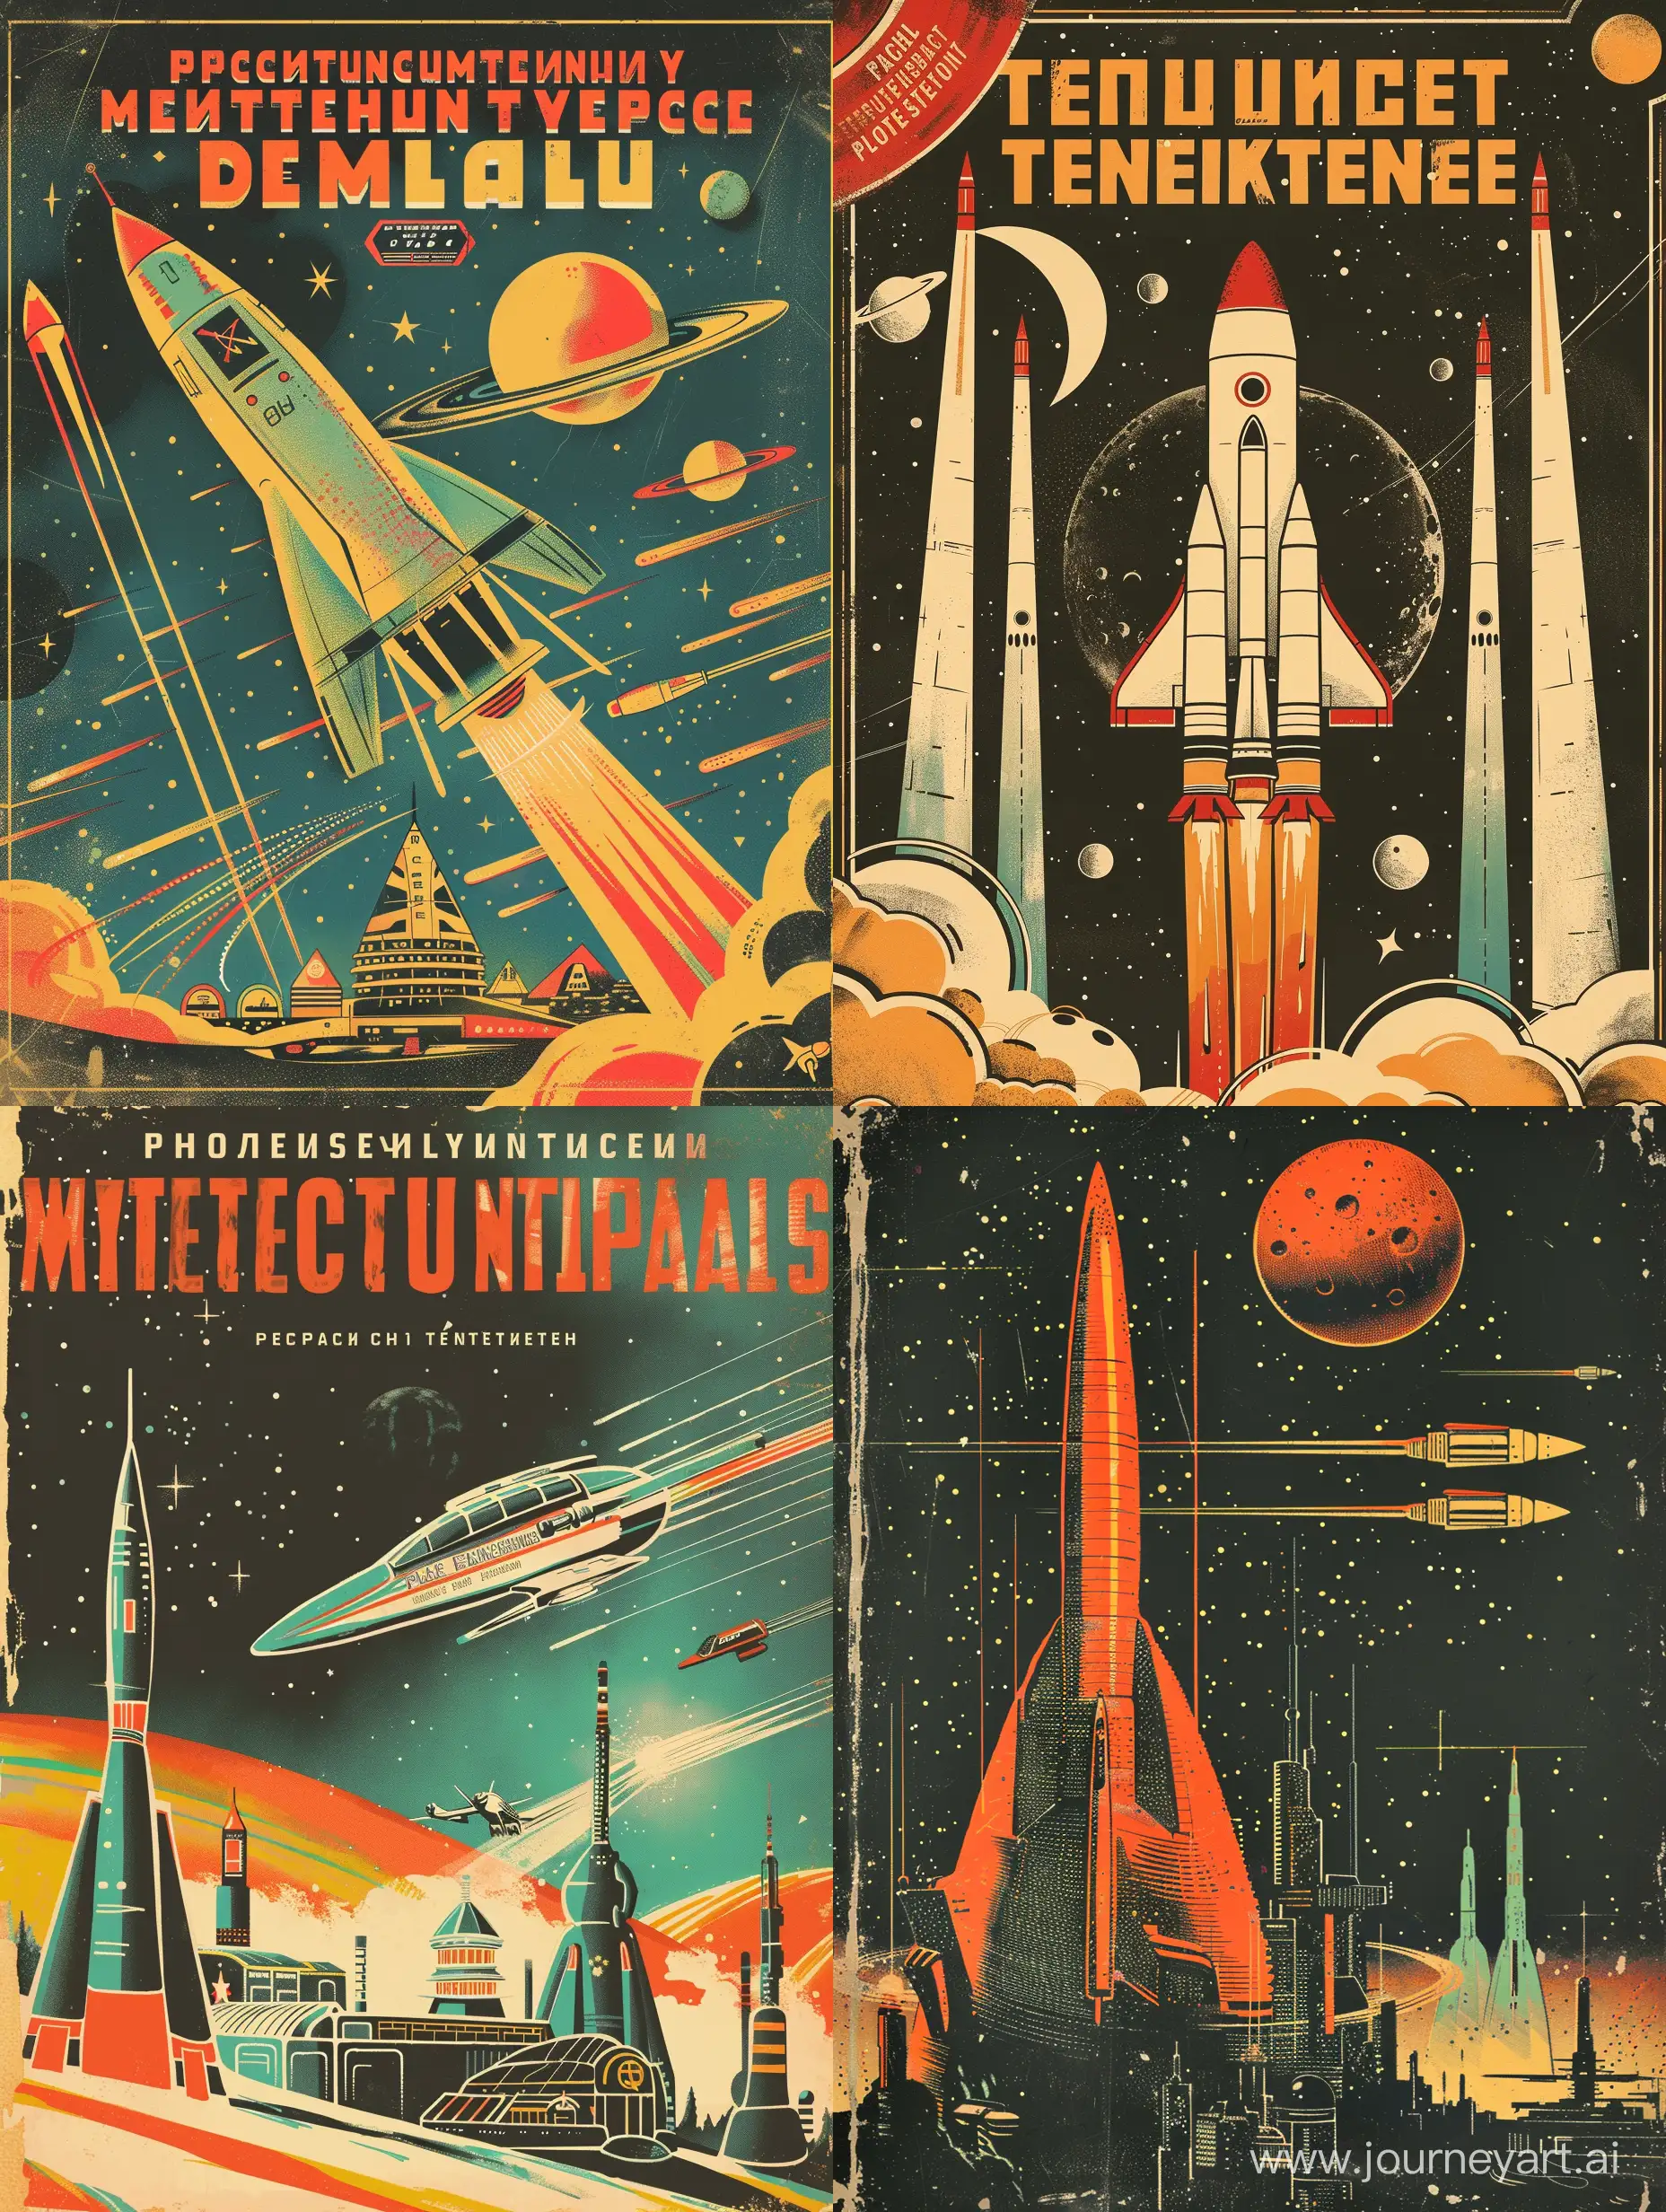 The cover of a serious book for students of space technology university on intergalactic travel . Soviet Union style. Sovietpunk. Retrofuturism.